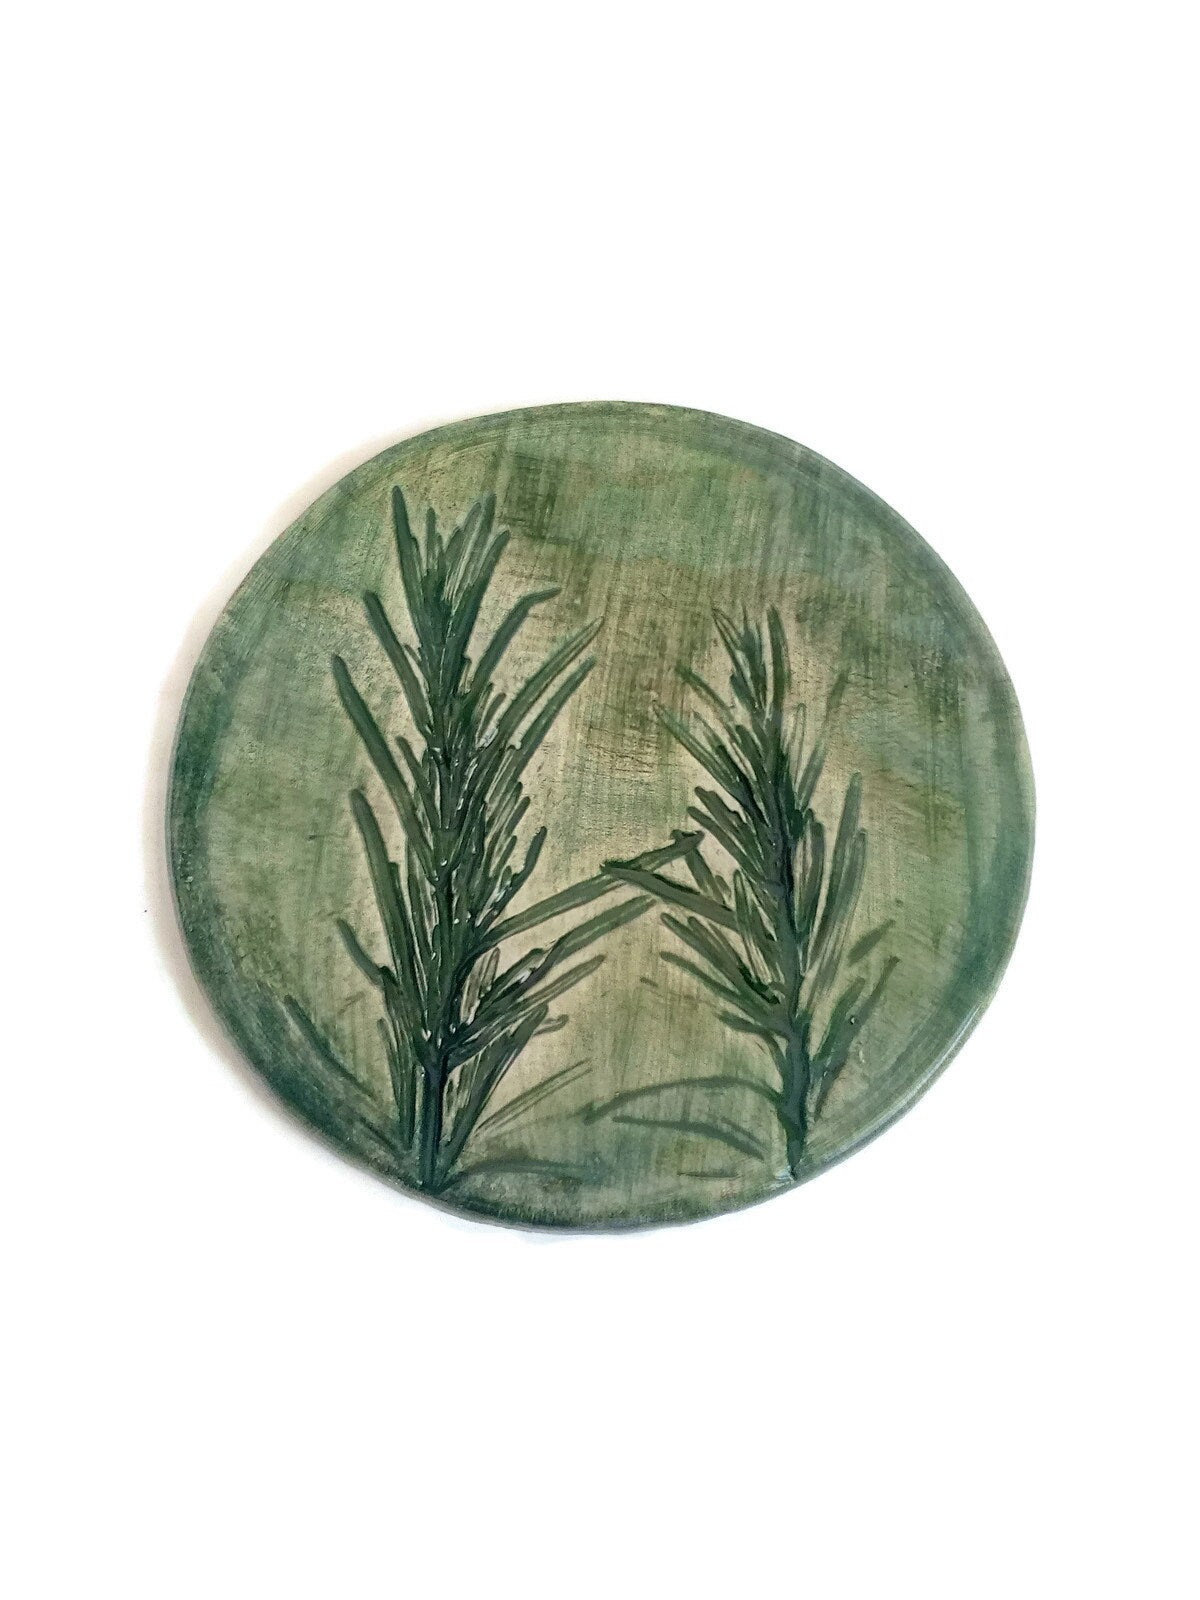 1Pc Handmade Ceramic Rustic Coasters Tile With Cork Back, Mothers Day Gift Idea, Botanical Round Coasters For Plant Lovers Artisan Pottery - Ceramica Ana Rafael